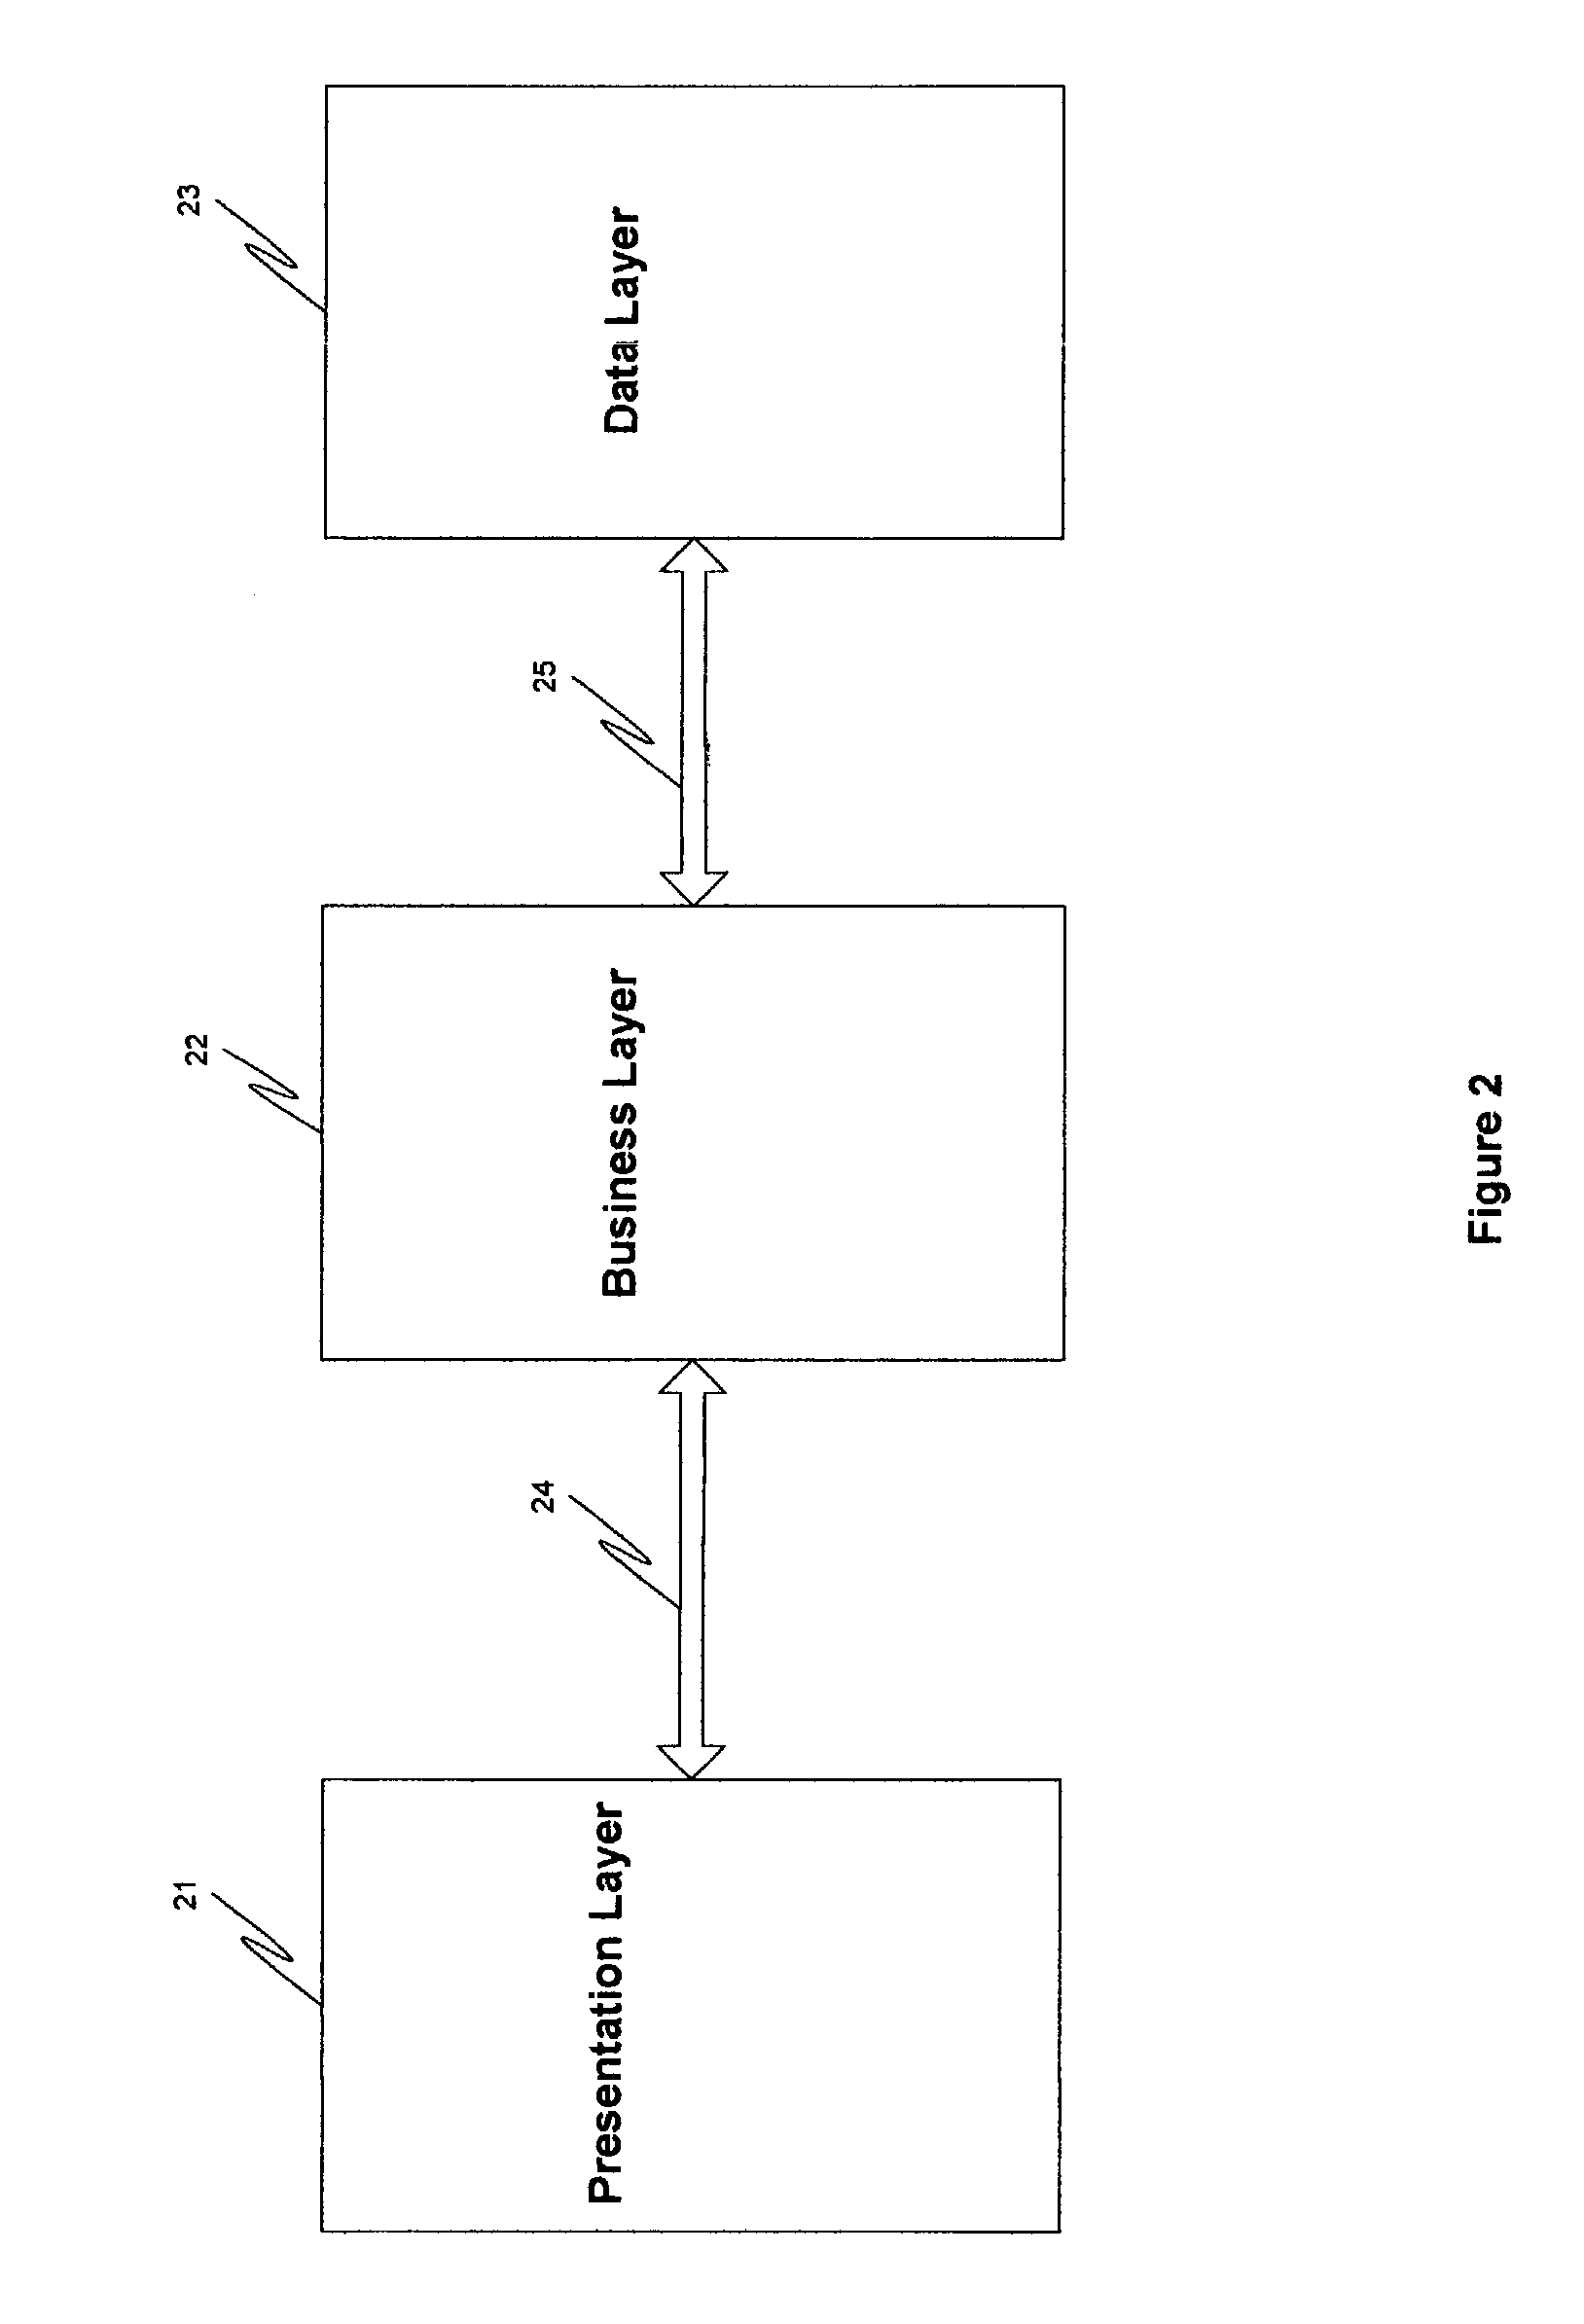 Voice controlled business scheduling system and method